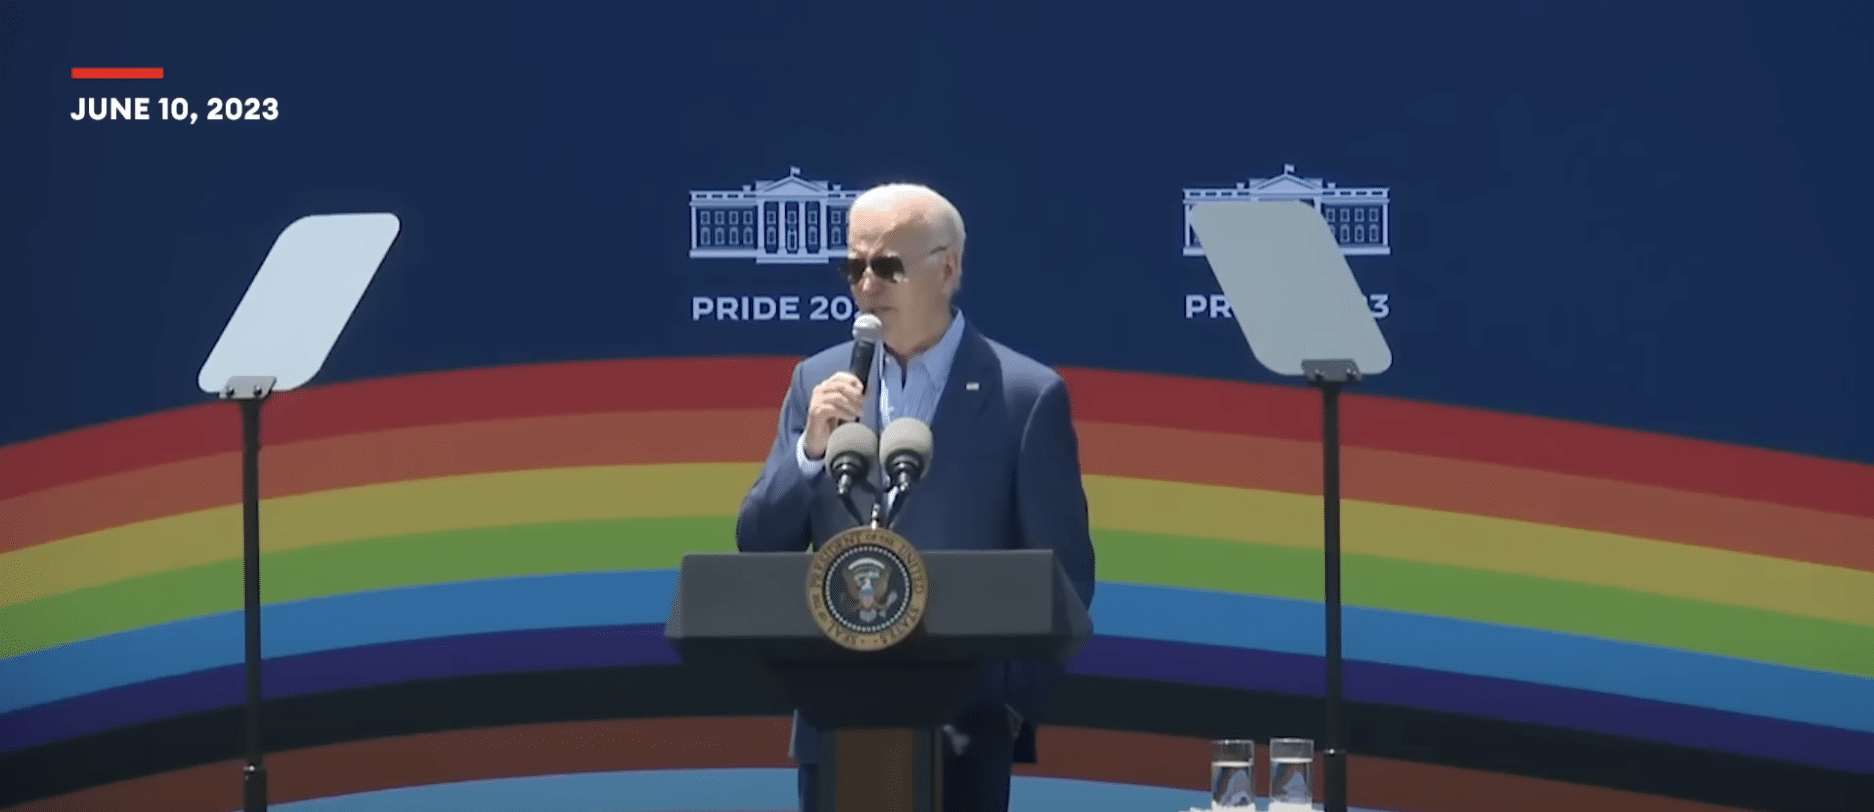 (WATCH) PolitiFact rates Biden’s claim that gay people are being kicked out of restaurants as ‘mostly true’